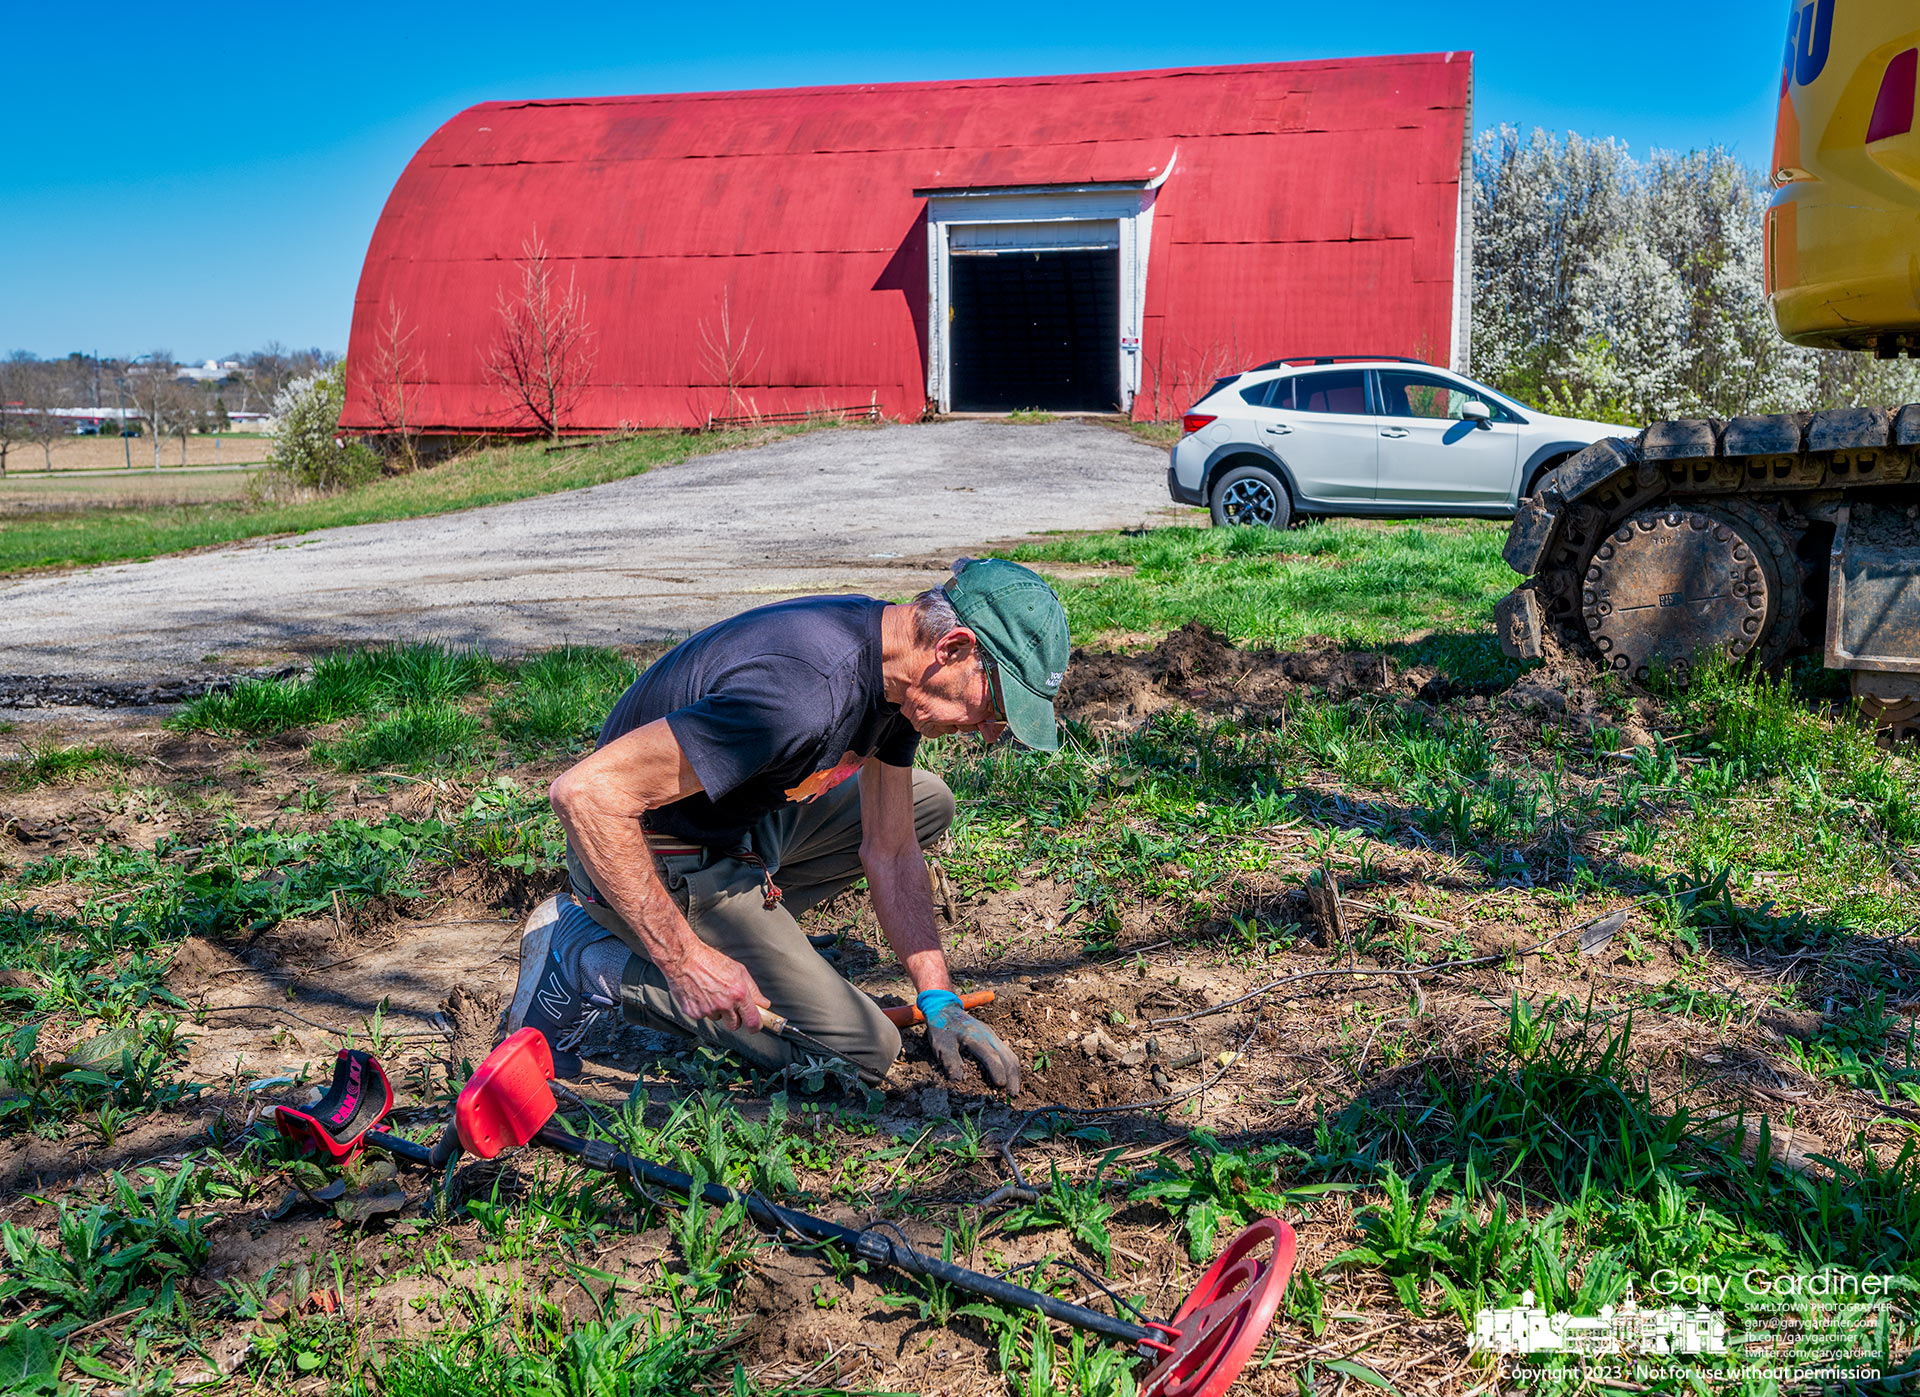 Detectorist Bill  Dawson digs into the soil beneath where the 1882 marker at the Braun Farm once sat looking for the metal object his detector alerted him to as he walked the area between the barn and farmhouse. My Final Photo for April 10, 2023.